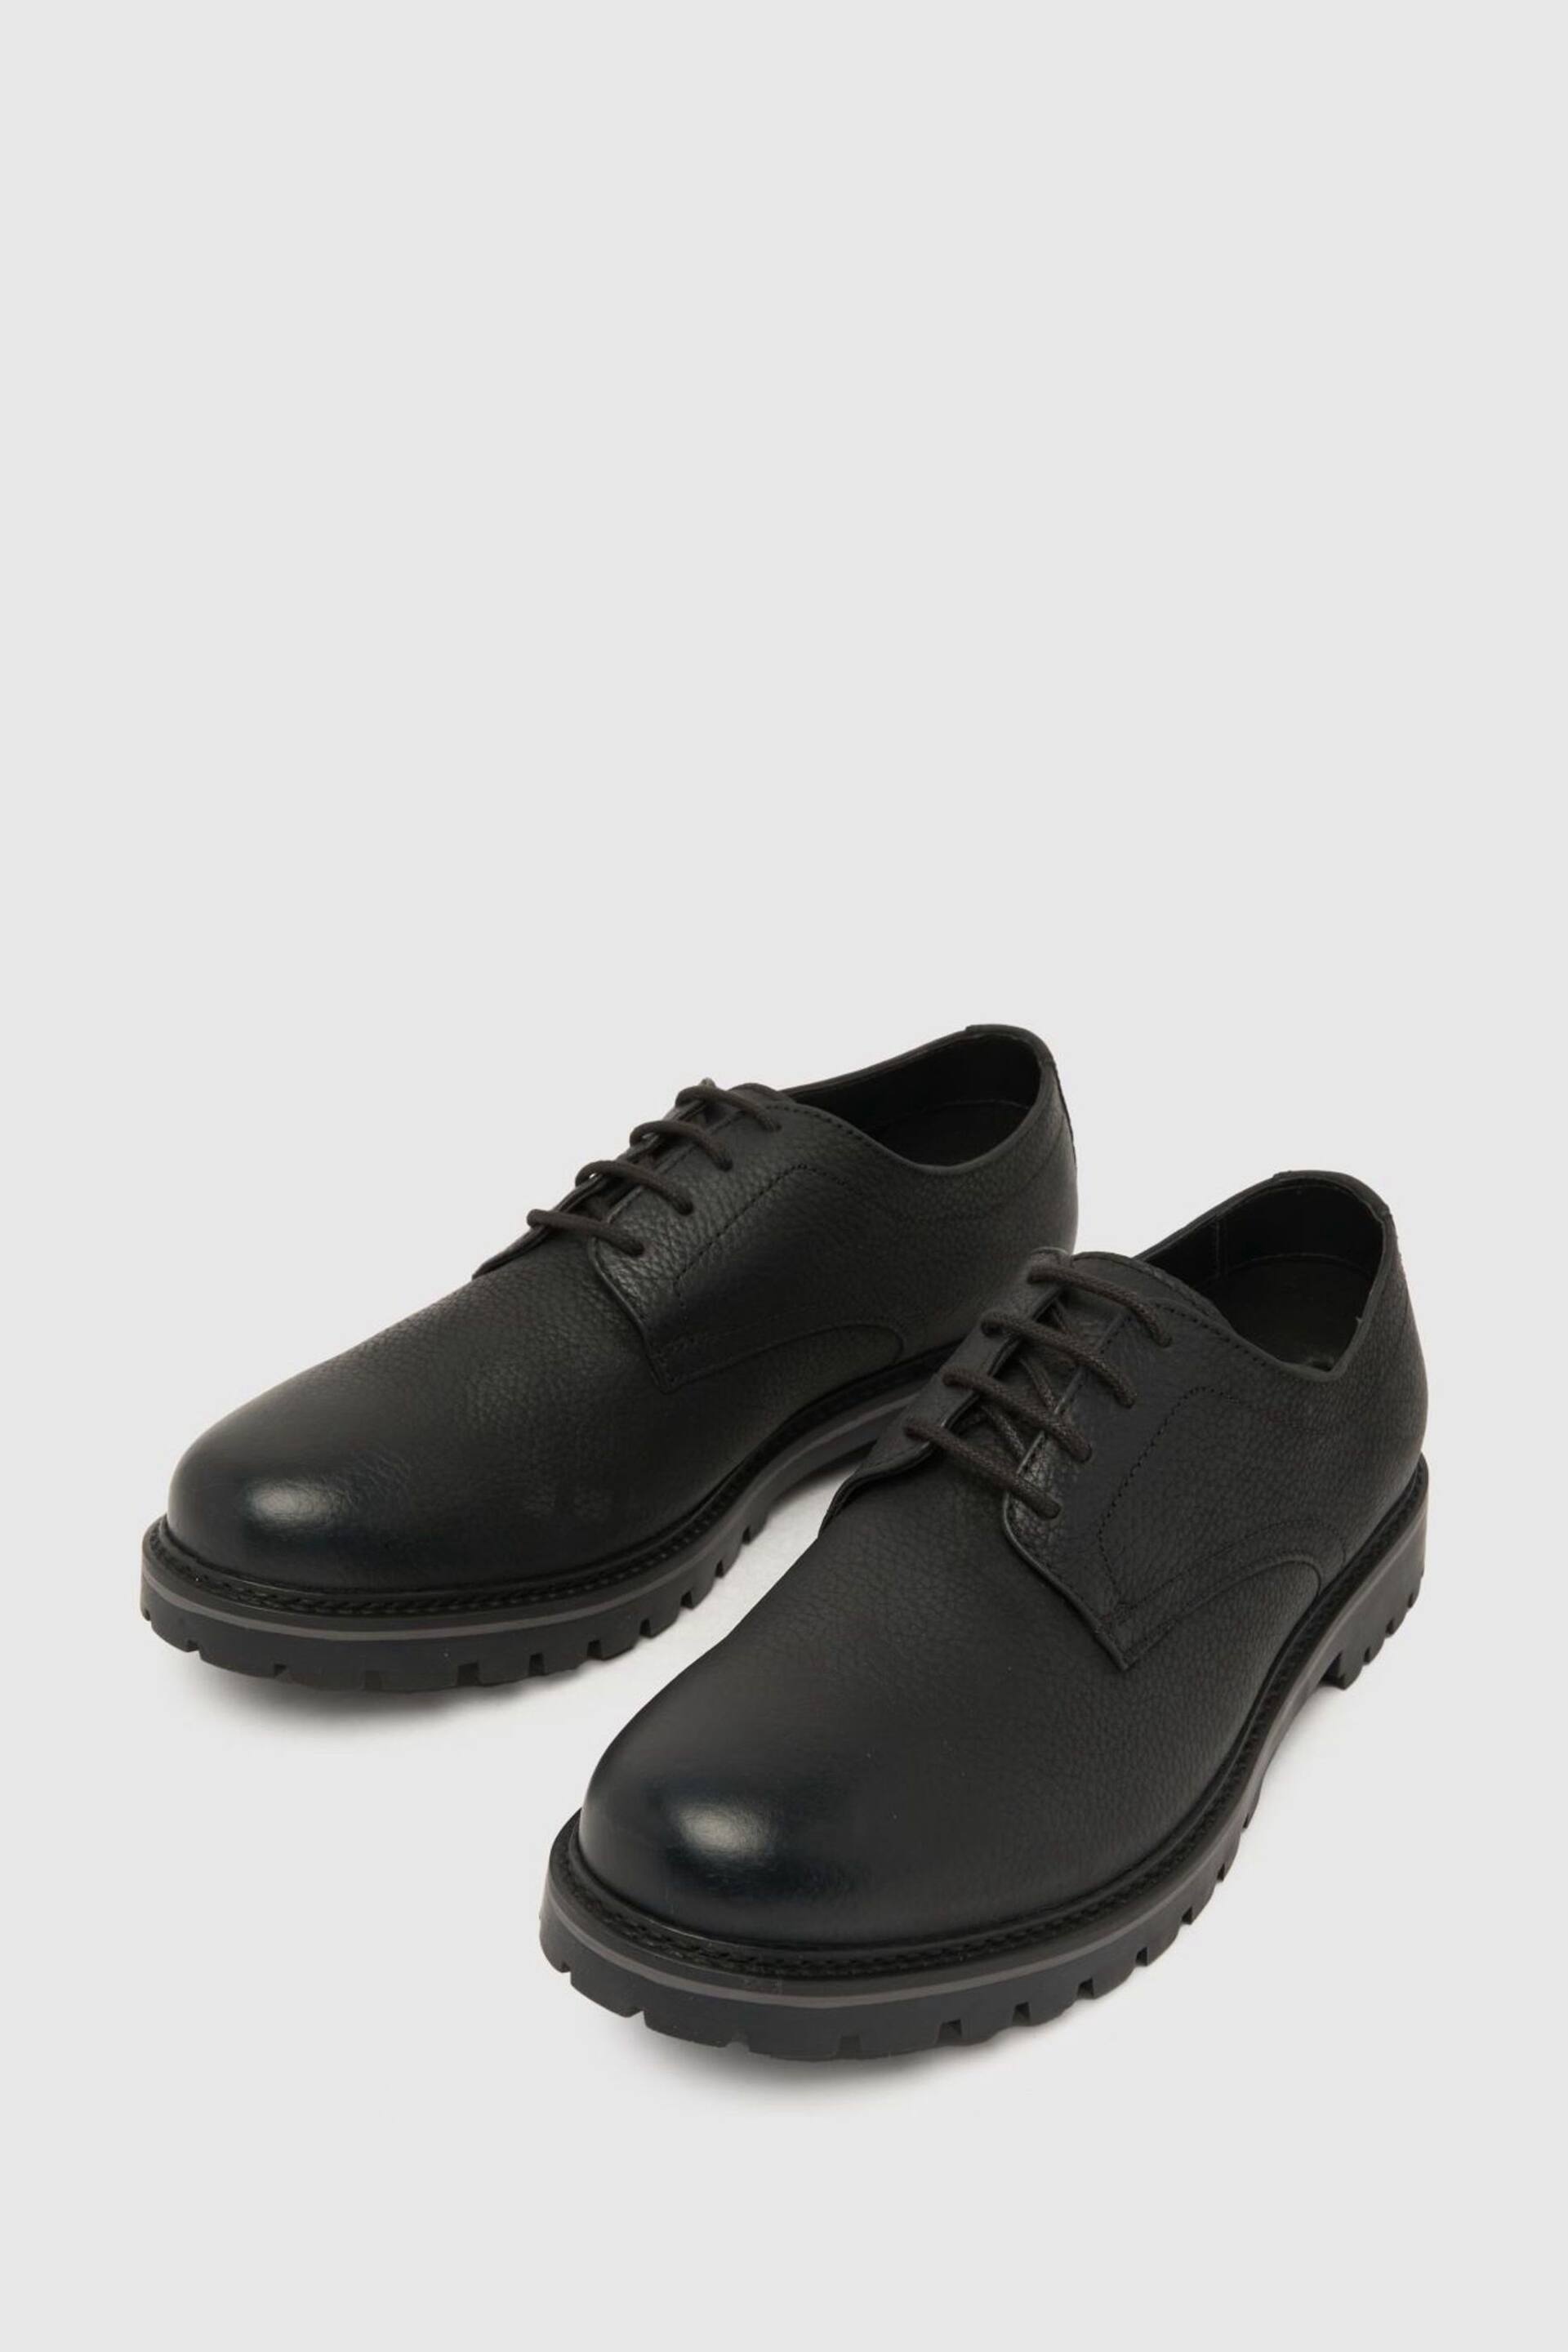 Schuh Paxon Leather Lace-Up Black Shoes - Image 1 of 4